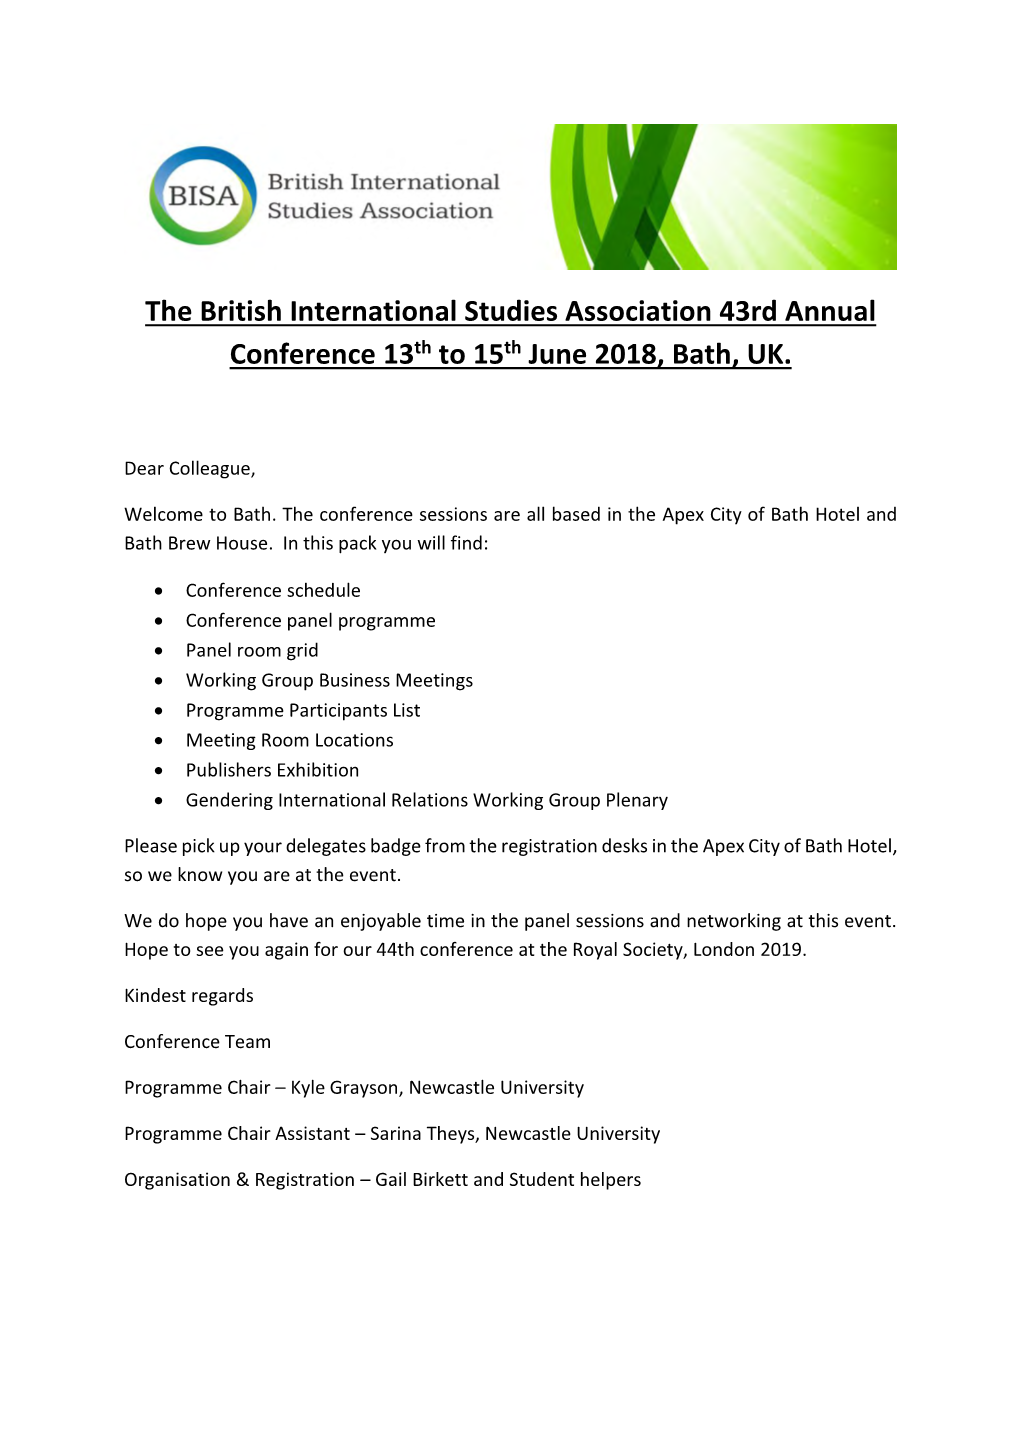 The British International Studies Association 43Rd Annual Conference 13Th to 15Th June 2018, Bath, UK